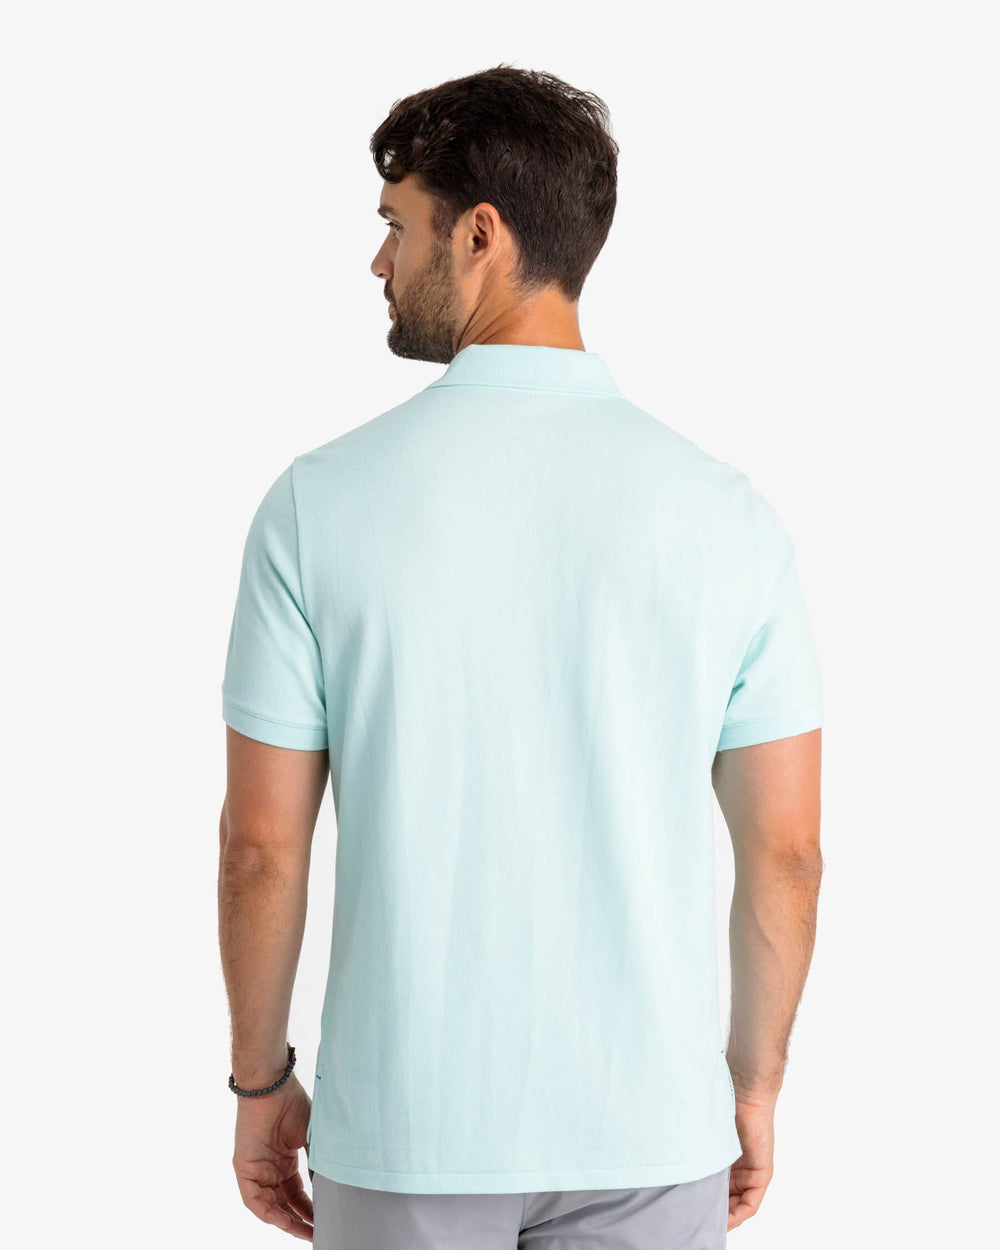 The model back view of the Men's New Skipjack Polo Shirt by Southern Tide - Baltic Teal